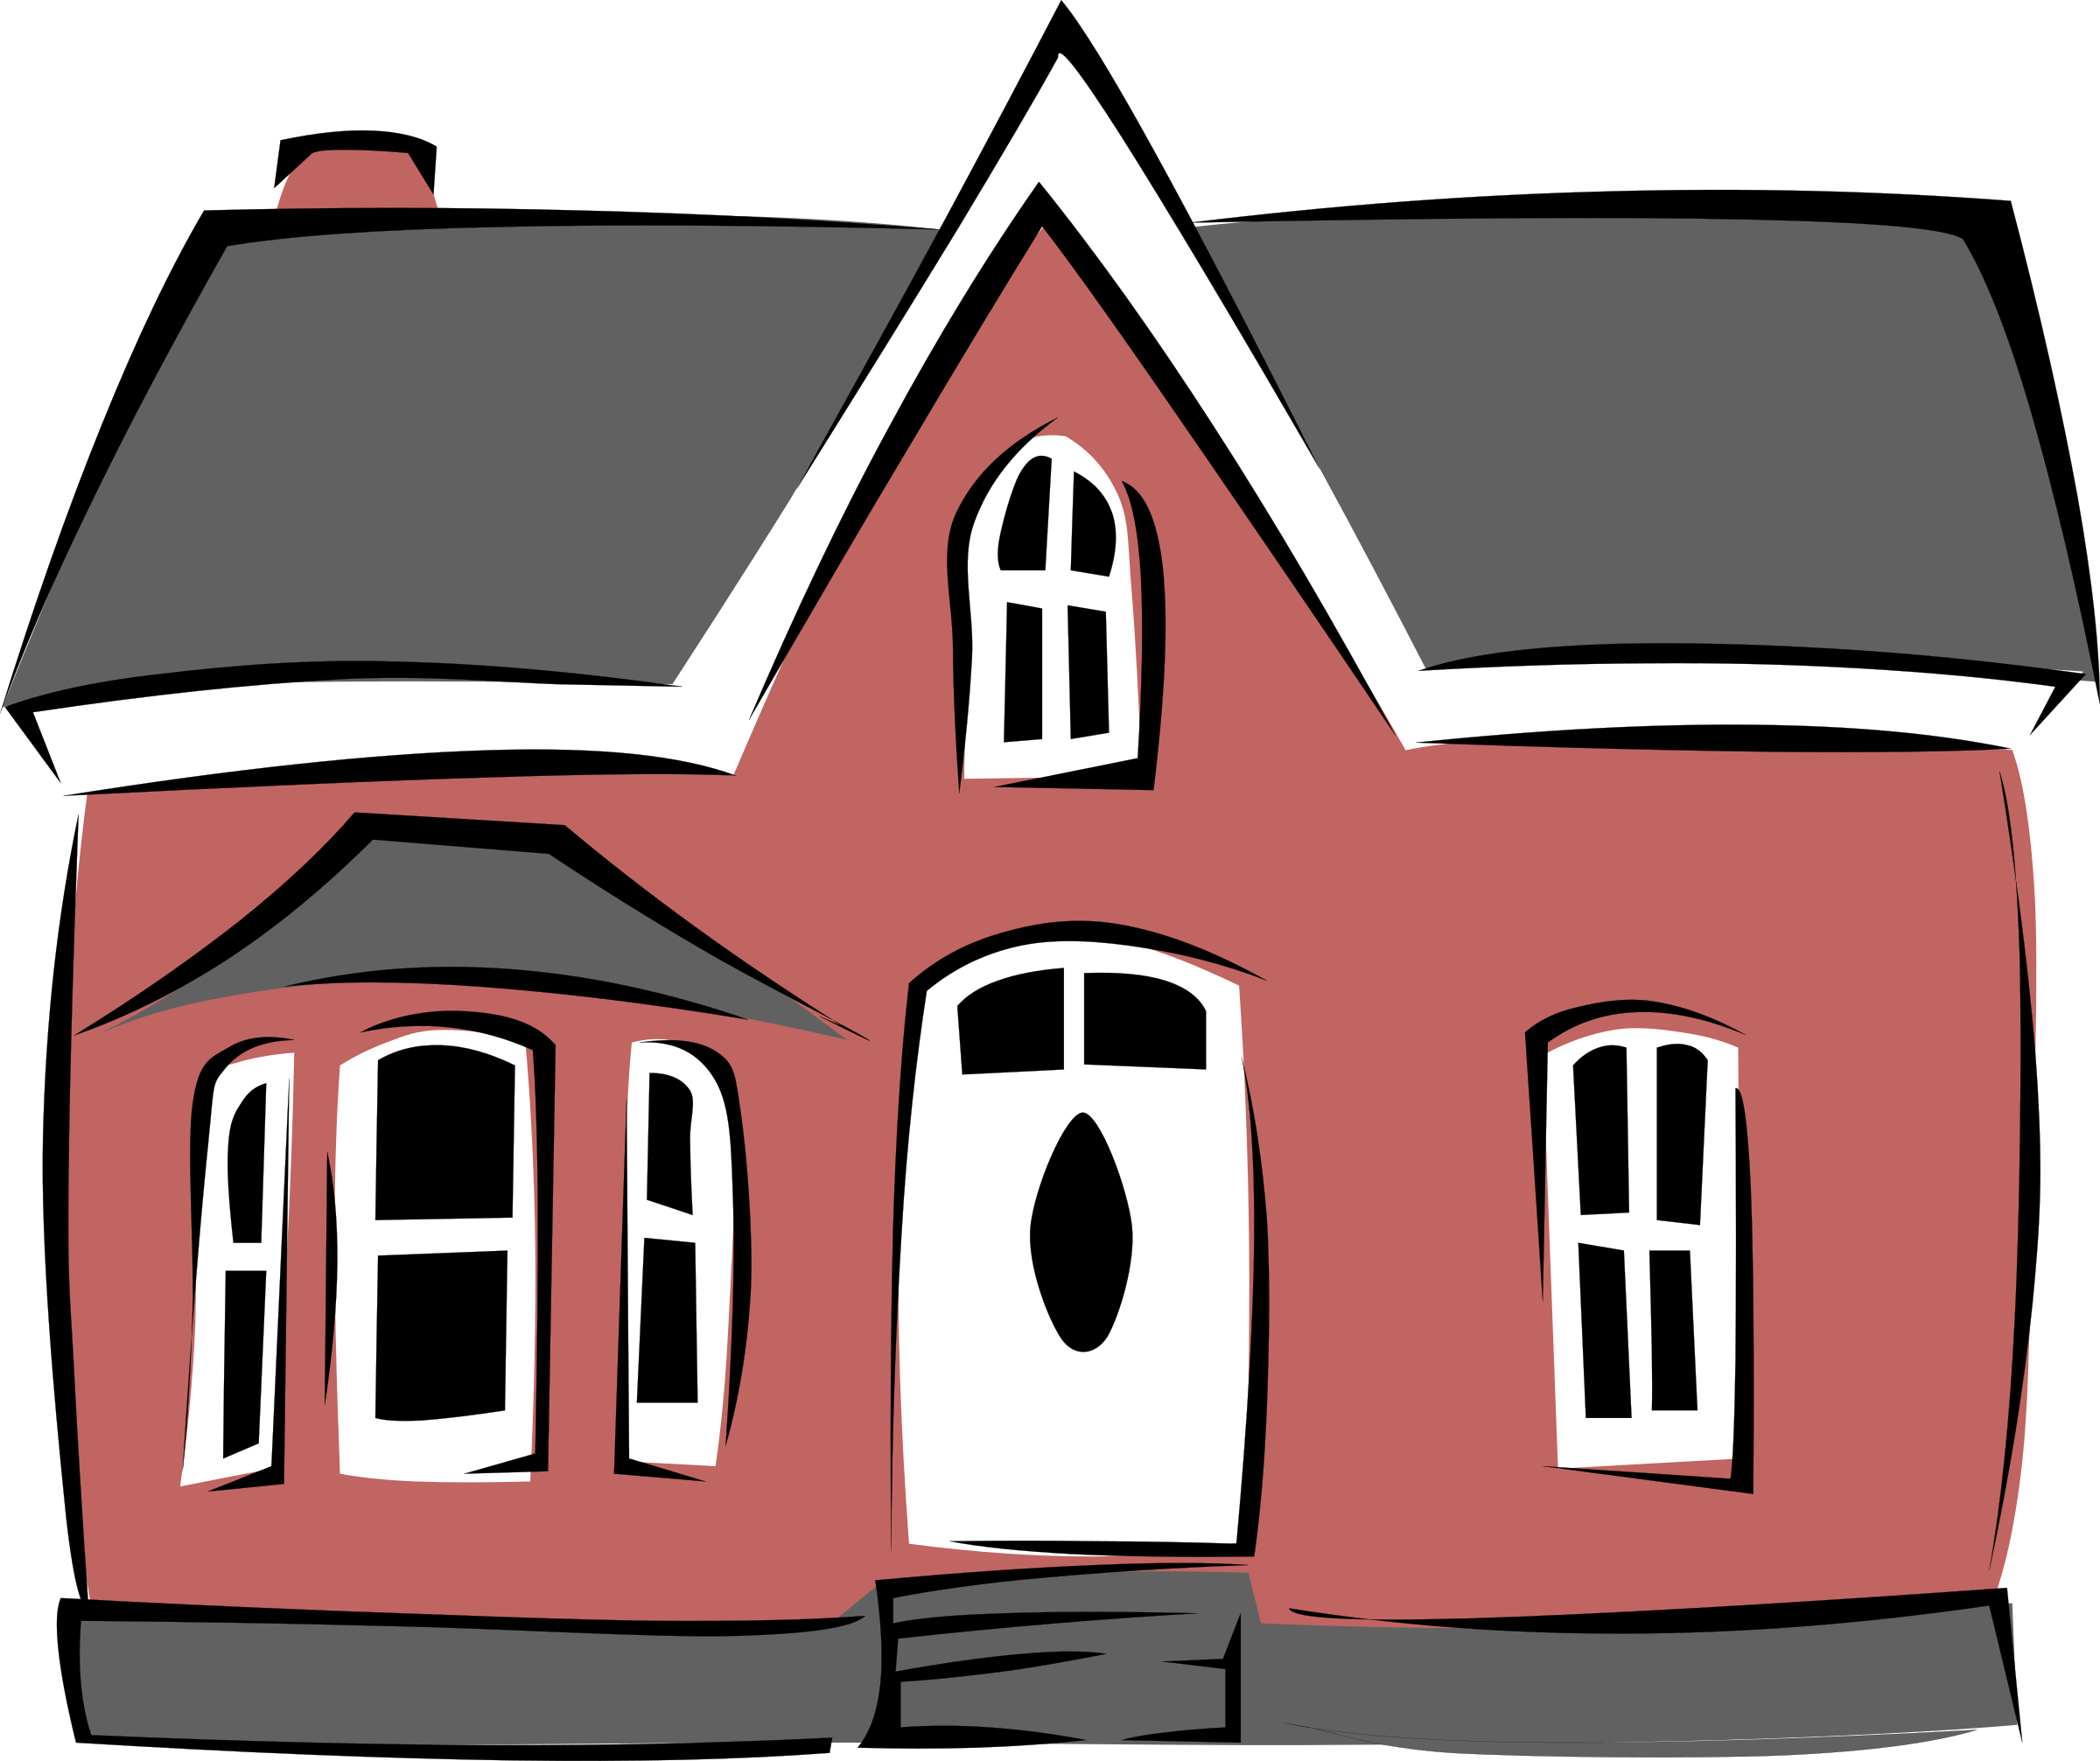 Small house by gerald. Ladder clipart stylish